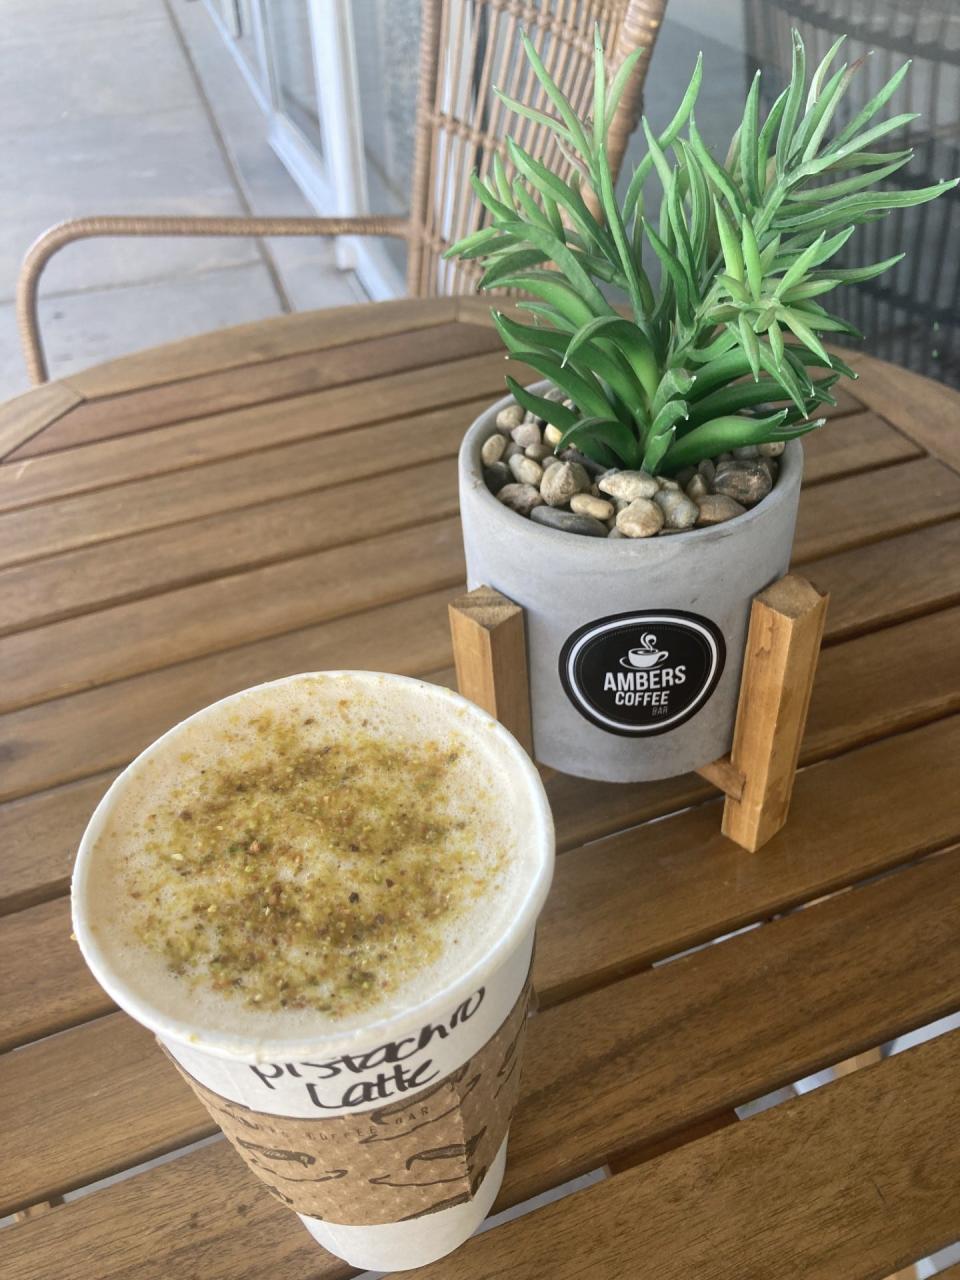 Ambers Coffee Bar in Horizon City is known for its nutty Pistachio latte.